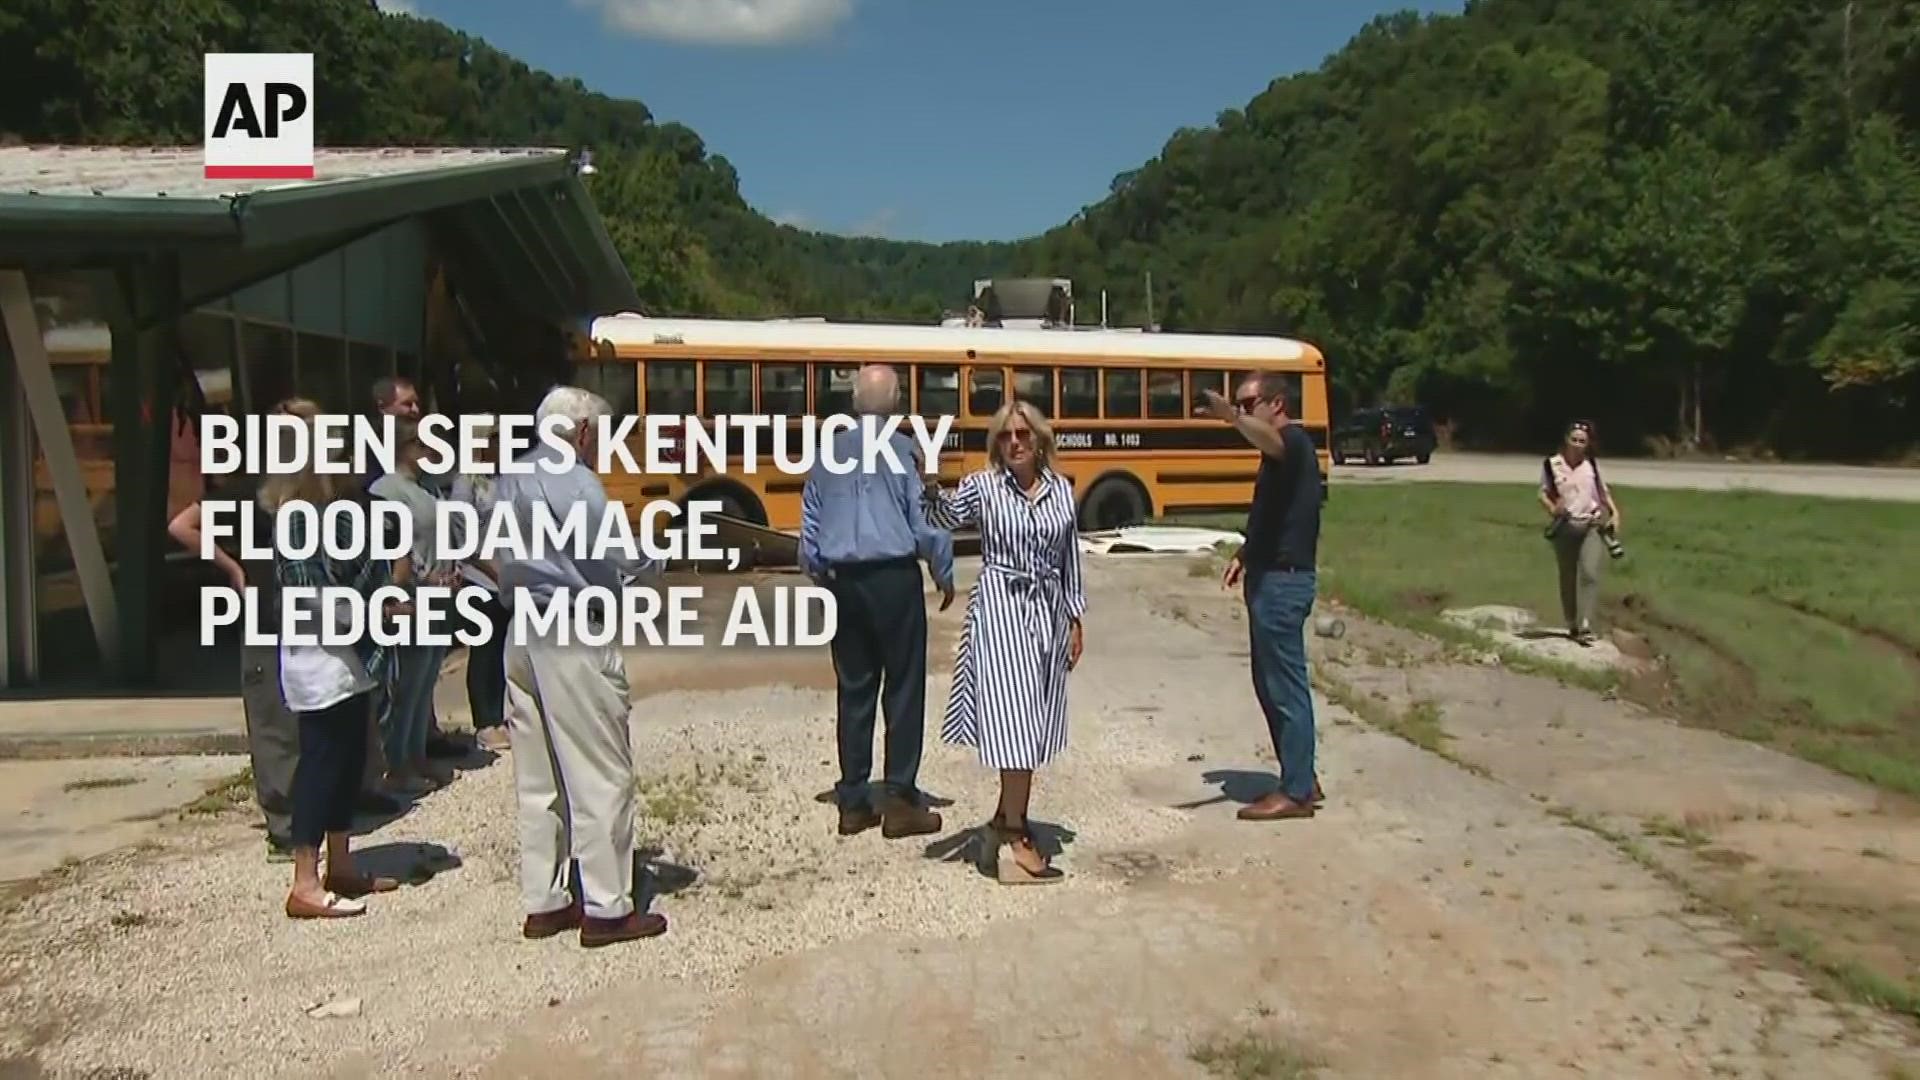 President Biden and first lady Jill Biden witnessed the damage on Monday from devastating storms that have resulted in the worst flooding in Kentucky's history.